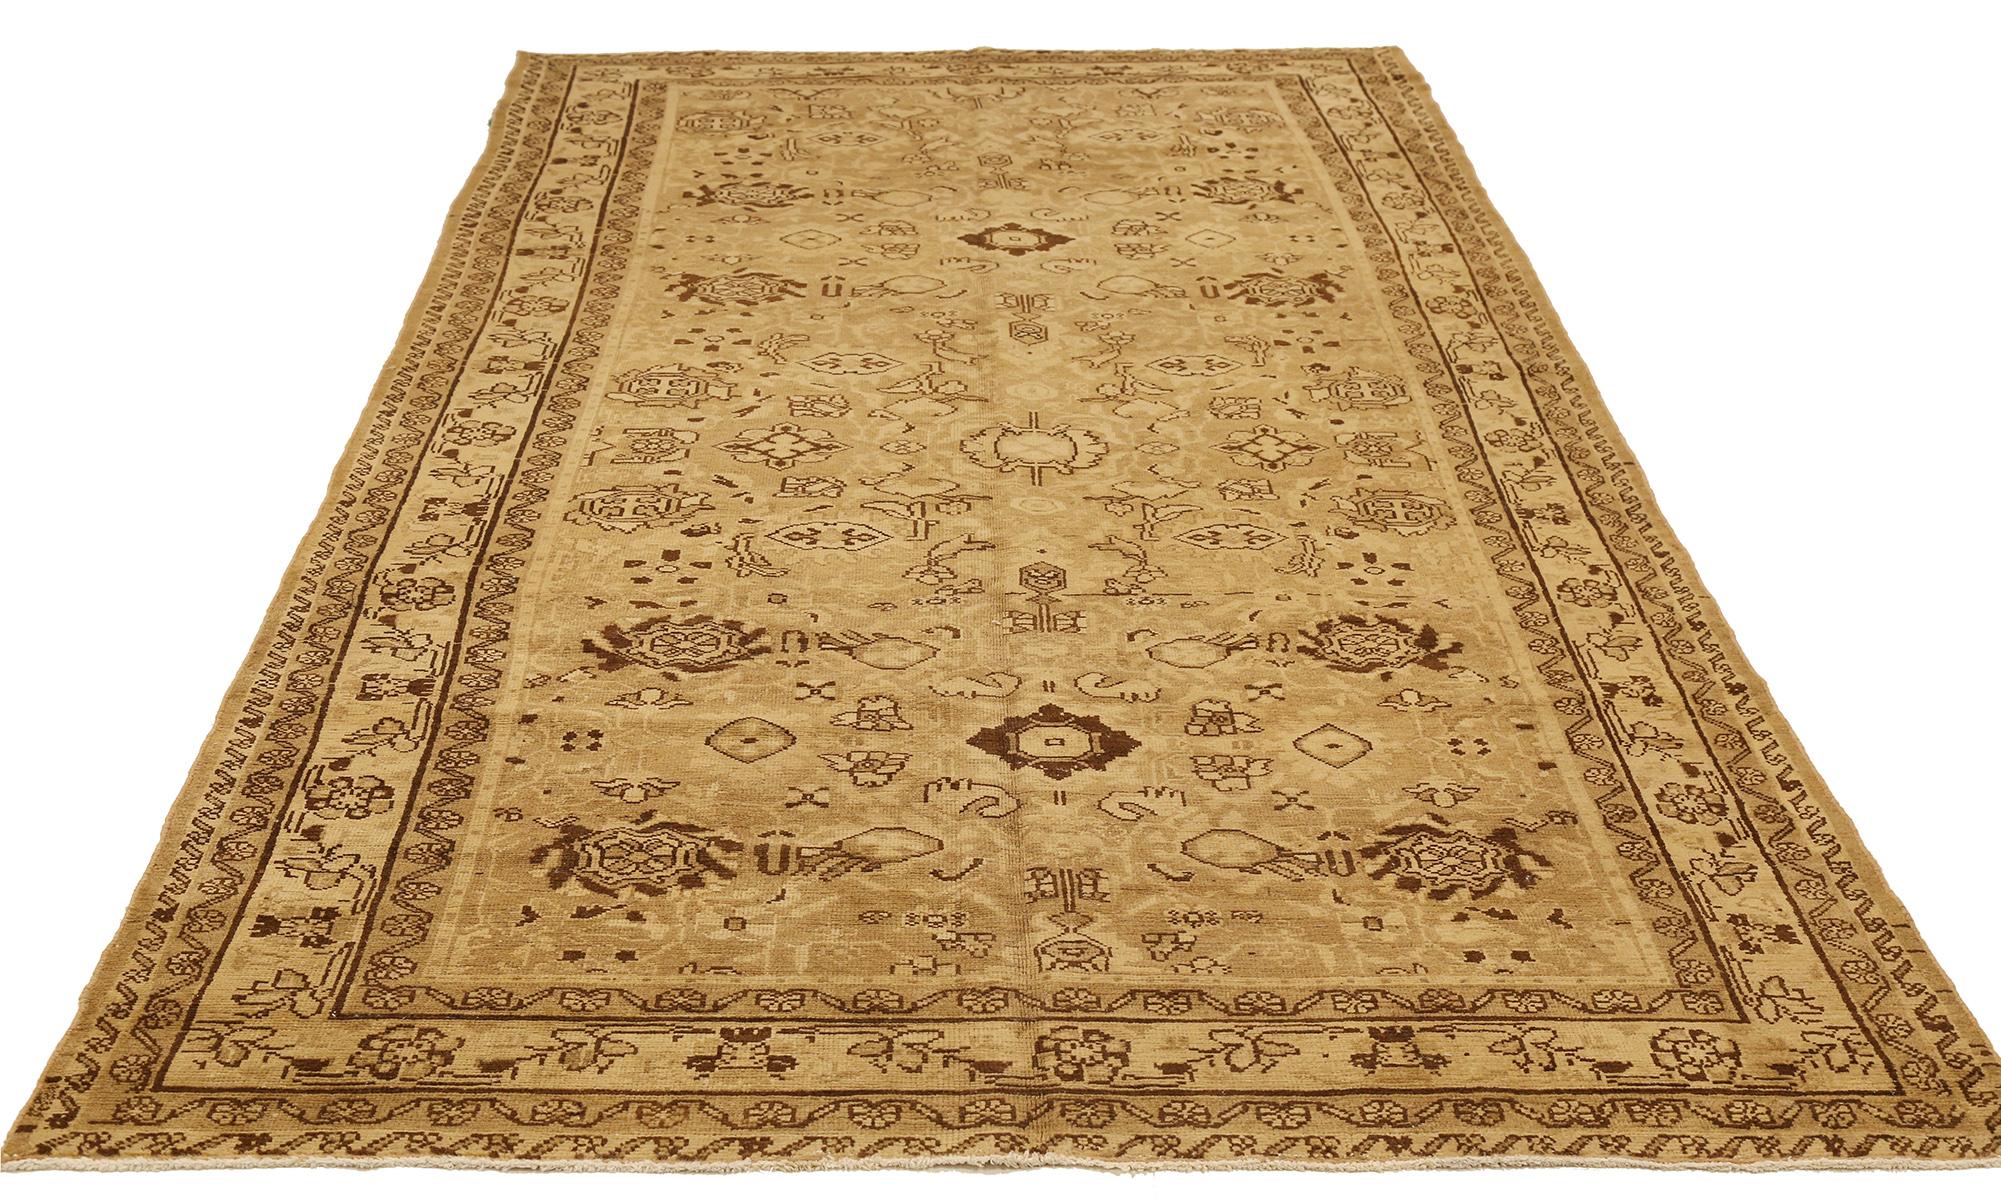 Antique Persian rug handwoven from the finest sheep’s wool and colored with all-natural vegetable dyes that are safe for humans and pets. It’s a traditional Malayer design featuring brown floral details all over its beige and ivory field. It’s a